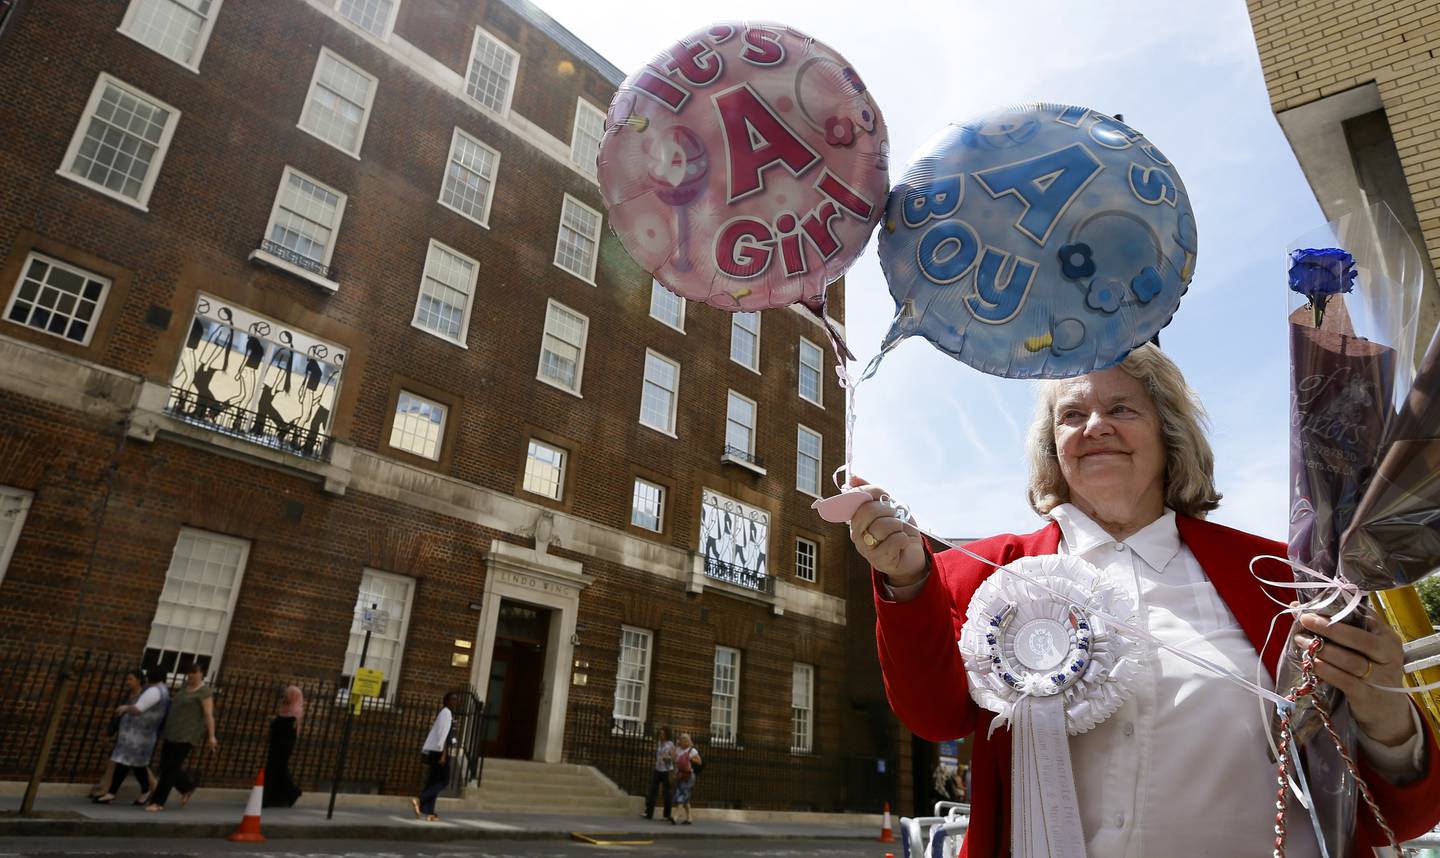 Royal supporter Margaret Tyler displays balloons for the media in front of the Lindo Wing at St Mary's Hospital in London, Monday, July 15, 2013. Britain's Kate, the Duchess of Cambridge plans to give birth to her first child who will be third-in-line to the throne at the hospital in mid-July. While mega-fanfare awaits the gender reveal of the latest British royal, parents-to-be weigh in on finding out the gender of their own little bundle ahead of time. (AP Photo/Kirsty Wigglesworth)